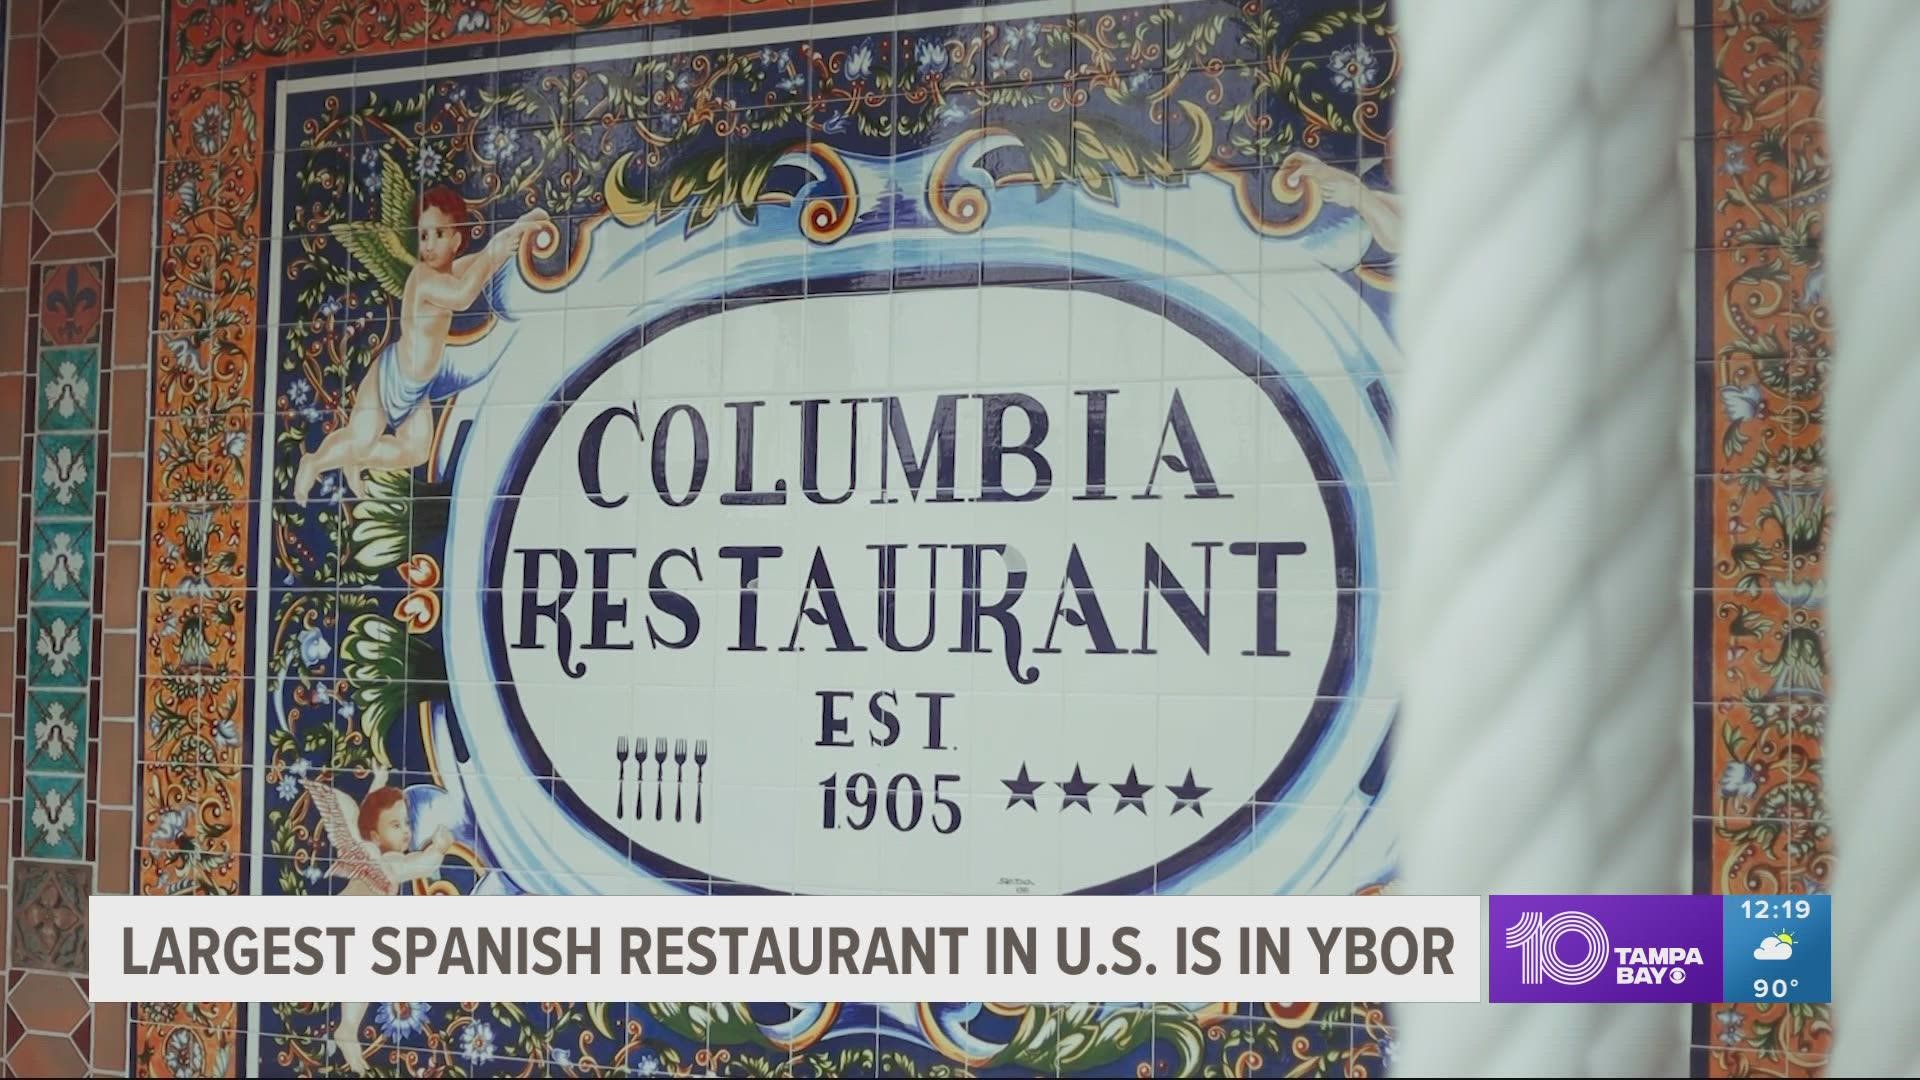 It's Florida's oldest restaurant and has been around since 1903.